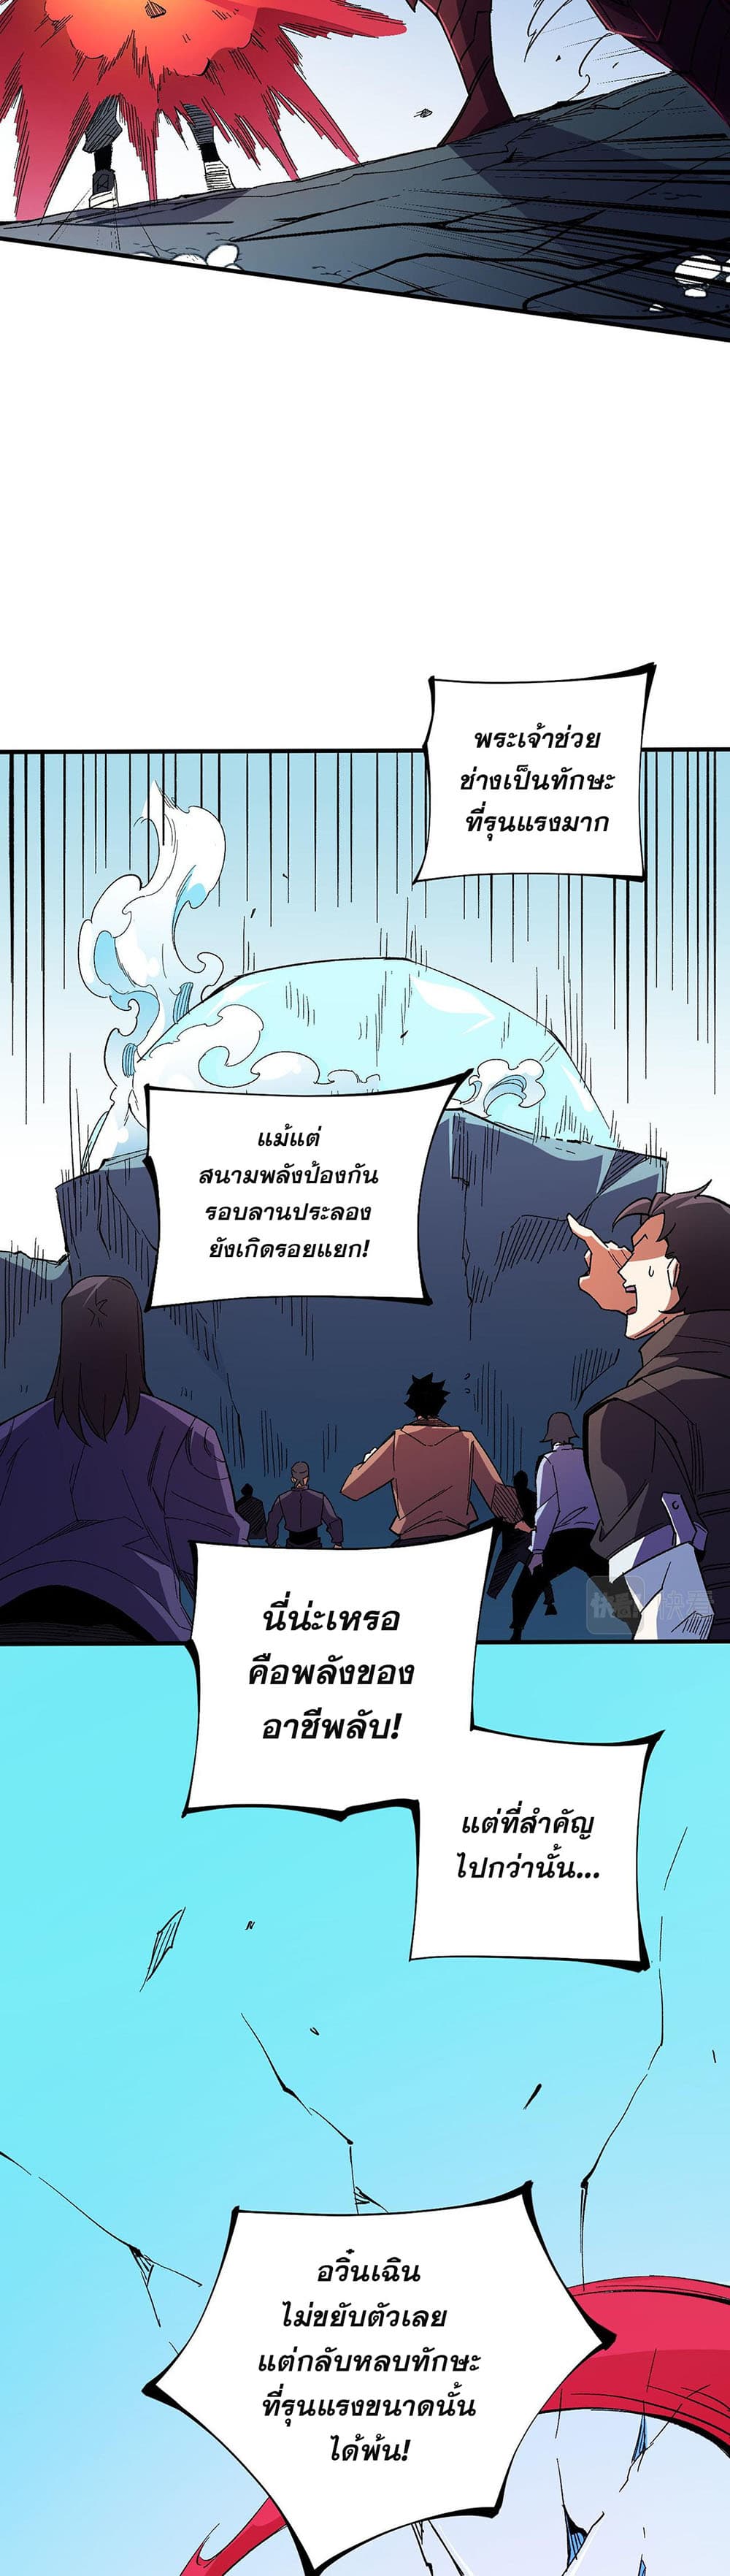 Job Changing for the Entire Population: The Jobless Me Will Terminate the Gods ฉันคือผู้เล่นไร้อาชีพที่สังหารเหล่าเทพ 17-17